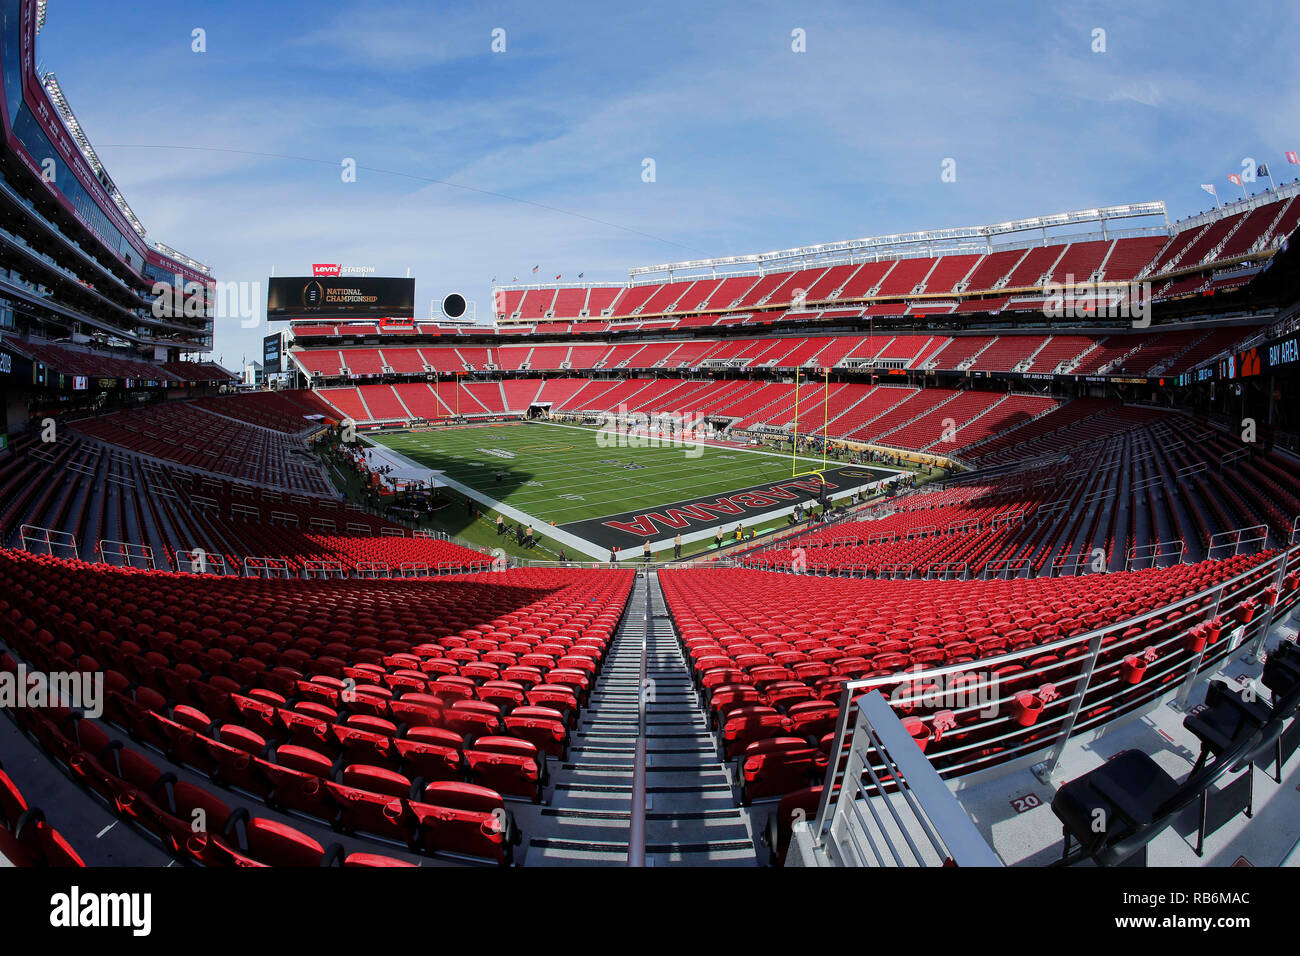 January 07, 2019 General view of Levi's Stadium before the National  Championship between the Clemson Tigers and the Alabama Crimson Tide at Levi's  Stadium in Santa Clara, California. Charles Baus/CSM Stock Photo -